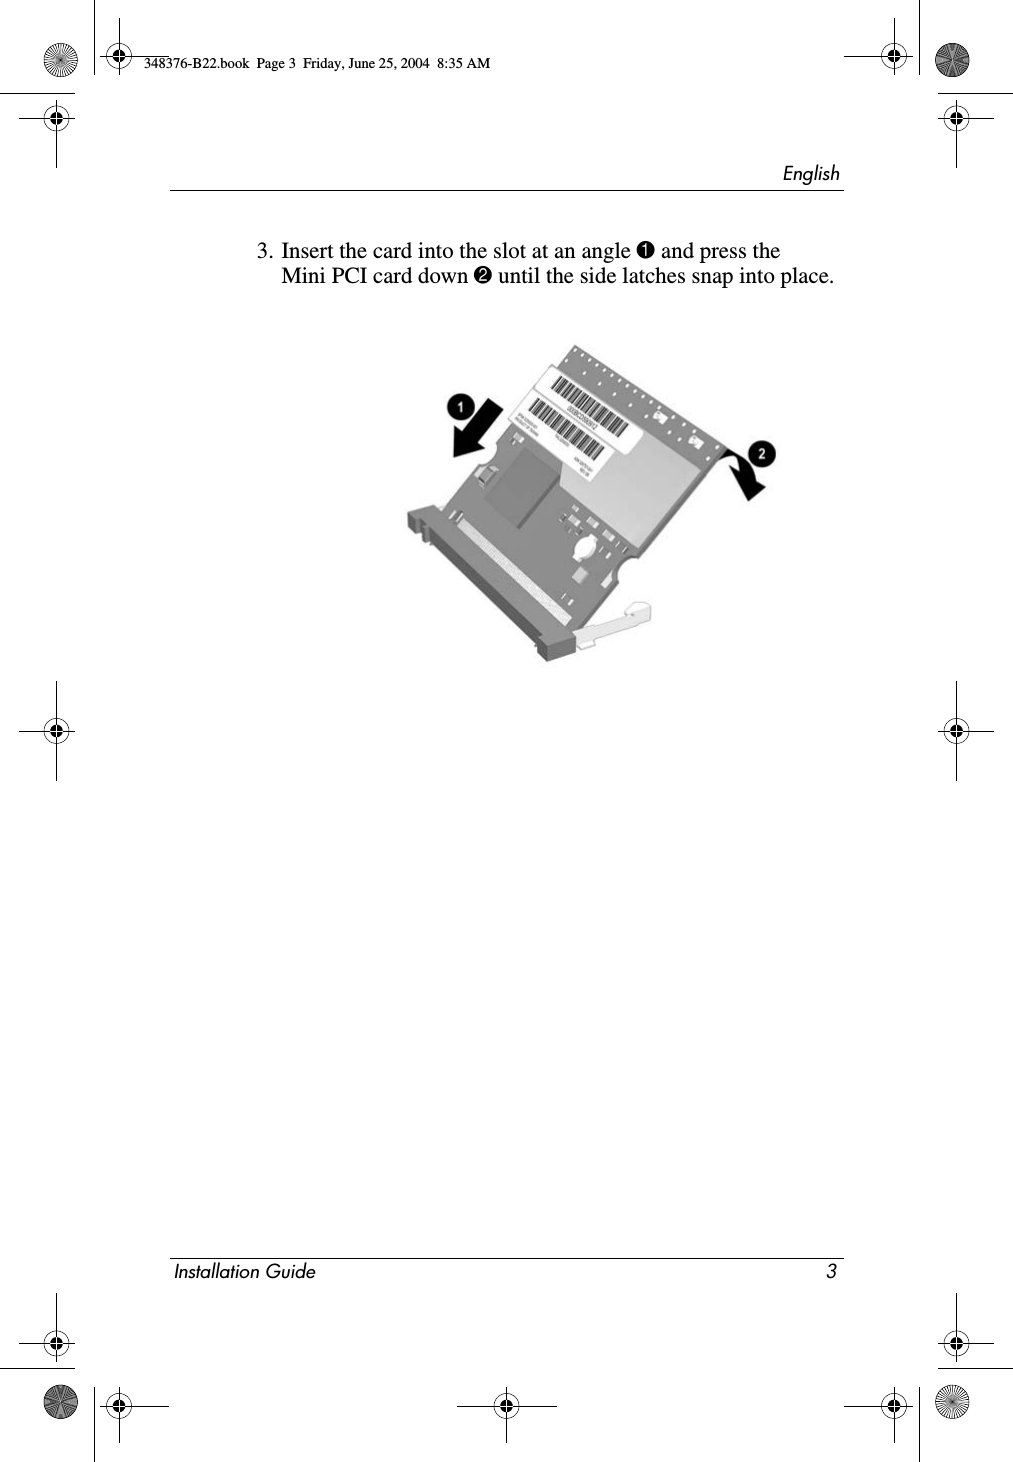 EnglishInstallation Guide 33. Insert the card into the slot at an angle 1 and press the Mini PCI card down 2 until the side latches snap into place.348376-B22.book  Page 3  Friday, June 25, 2004  8:35 AM